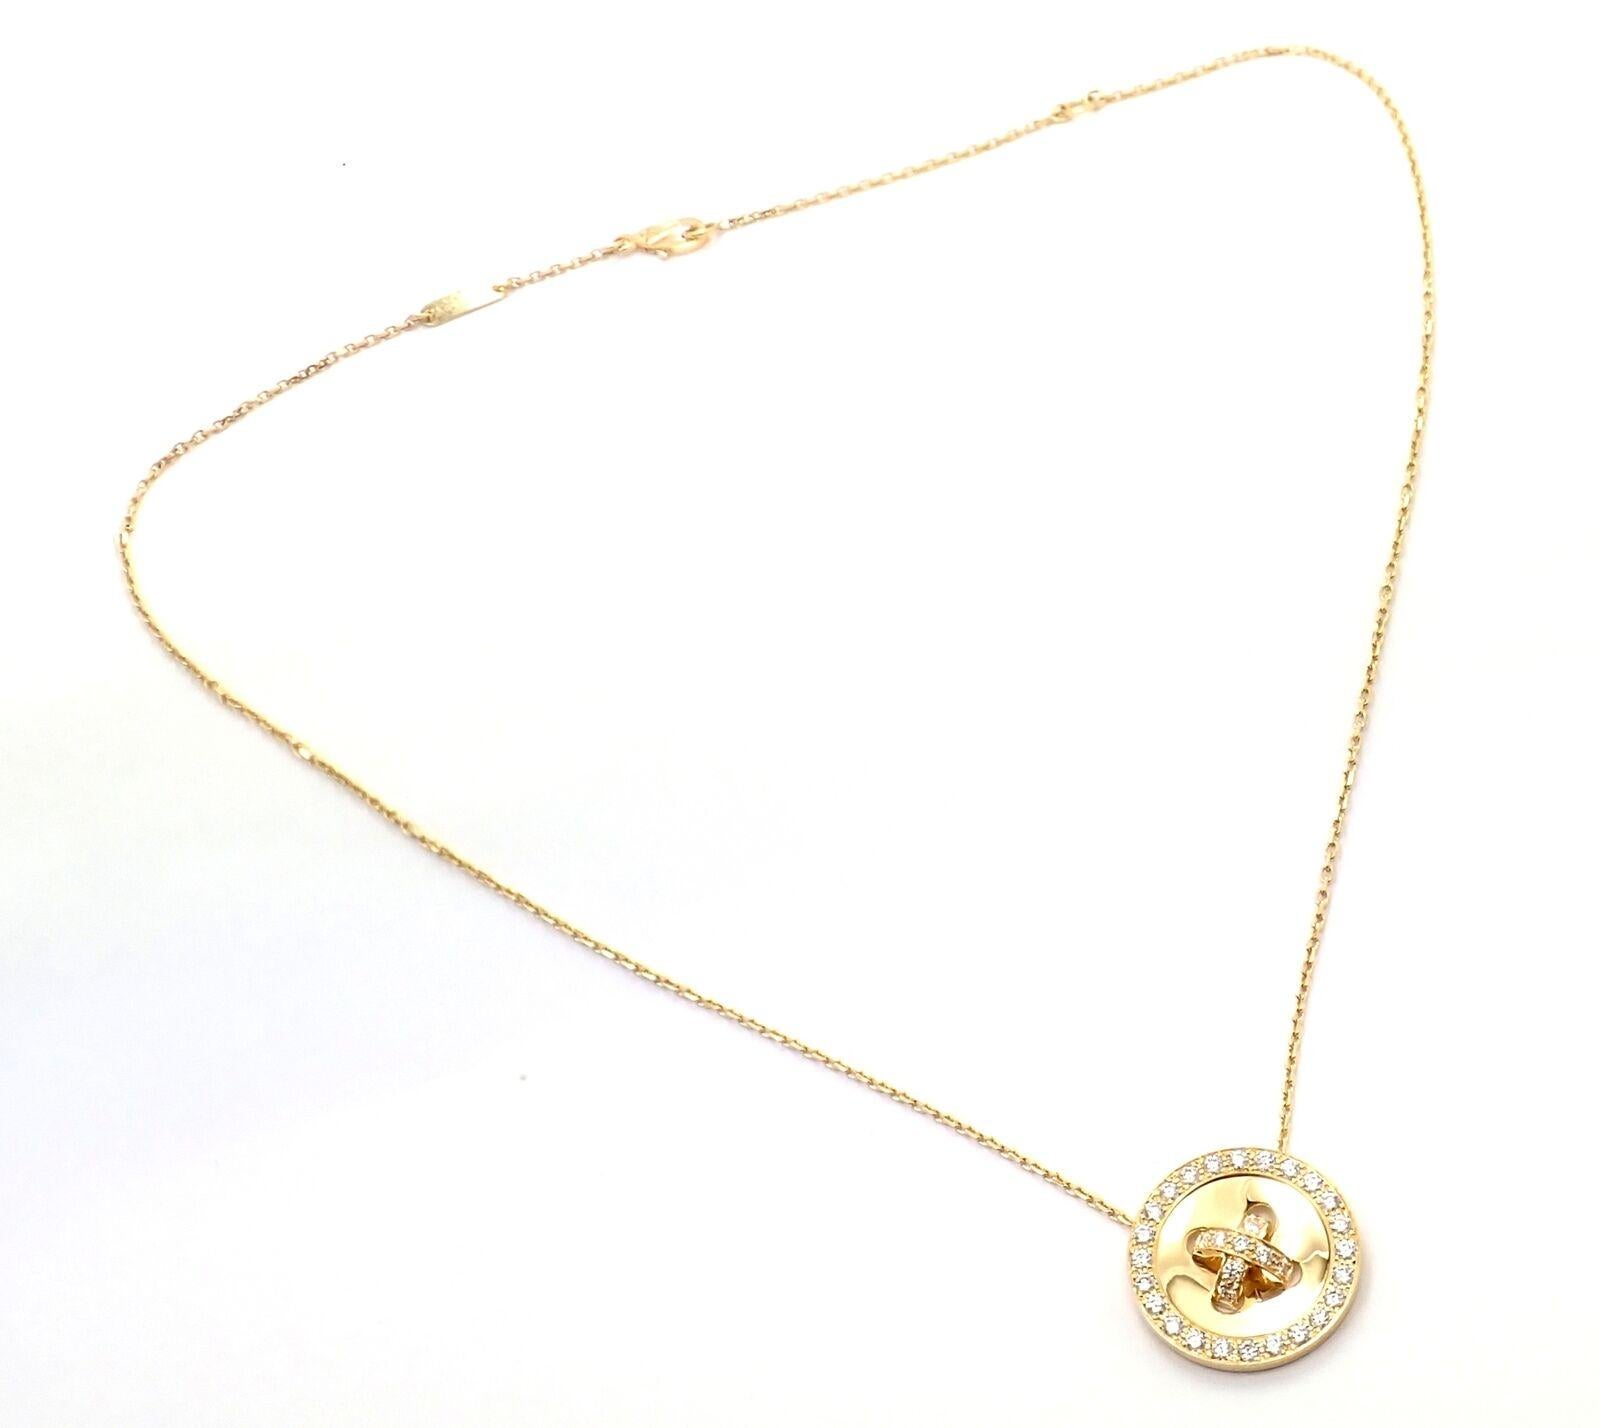 18k Yellow Gold Diamond Button Pendant Necklace by Van Cleef & Arpels.
With 34 Round Brilliant cut diamonds VS1 clarity, G color total weight approximately 1.00ct
This necklace comes with a service paper from a VCA store and a box.
Details:
Length: